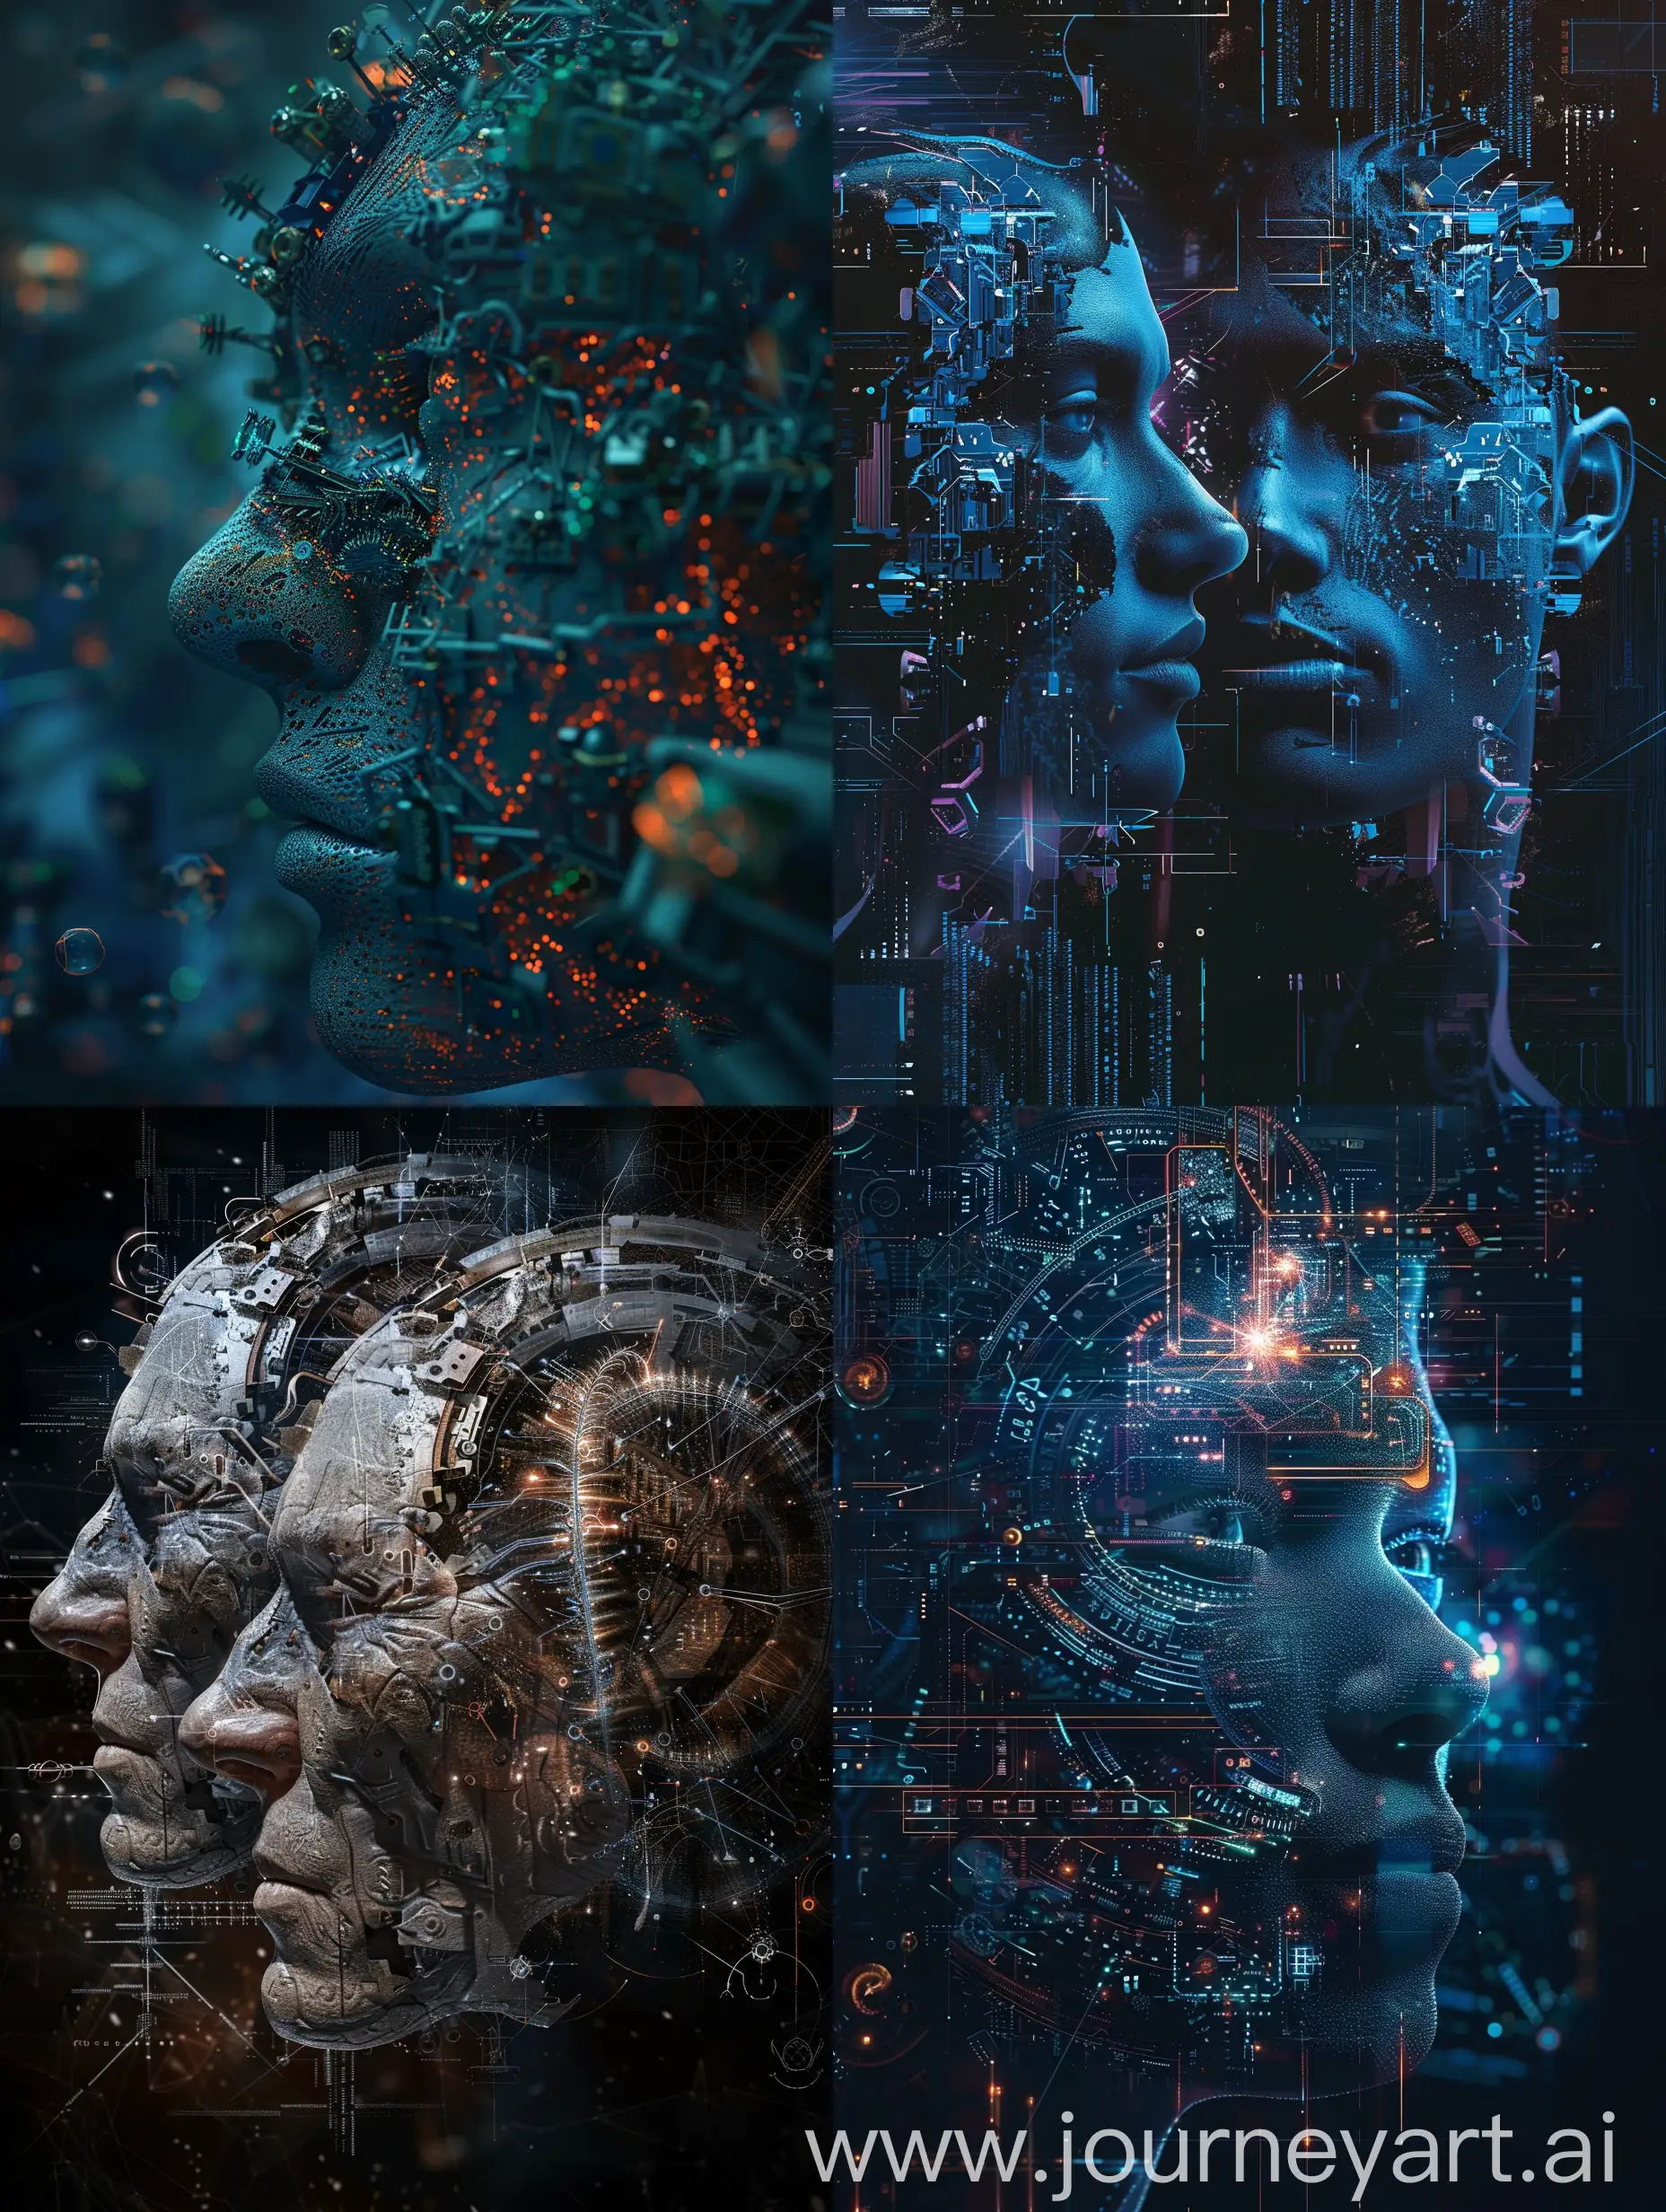 Dark colors Kingdom faces with hyper realistic machines, fractals , abstract concept with background representing quantum mechanics, machine learning, future of mankind.